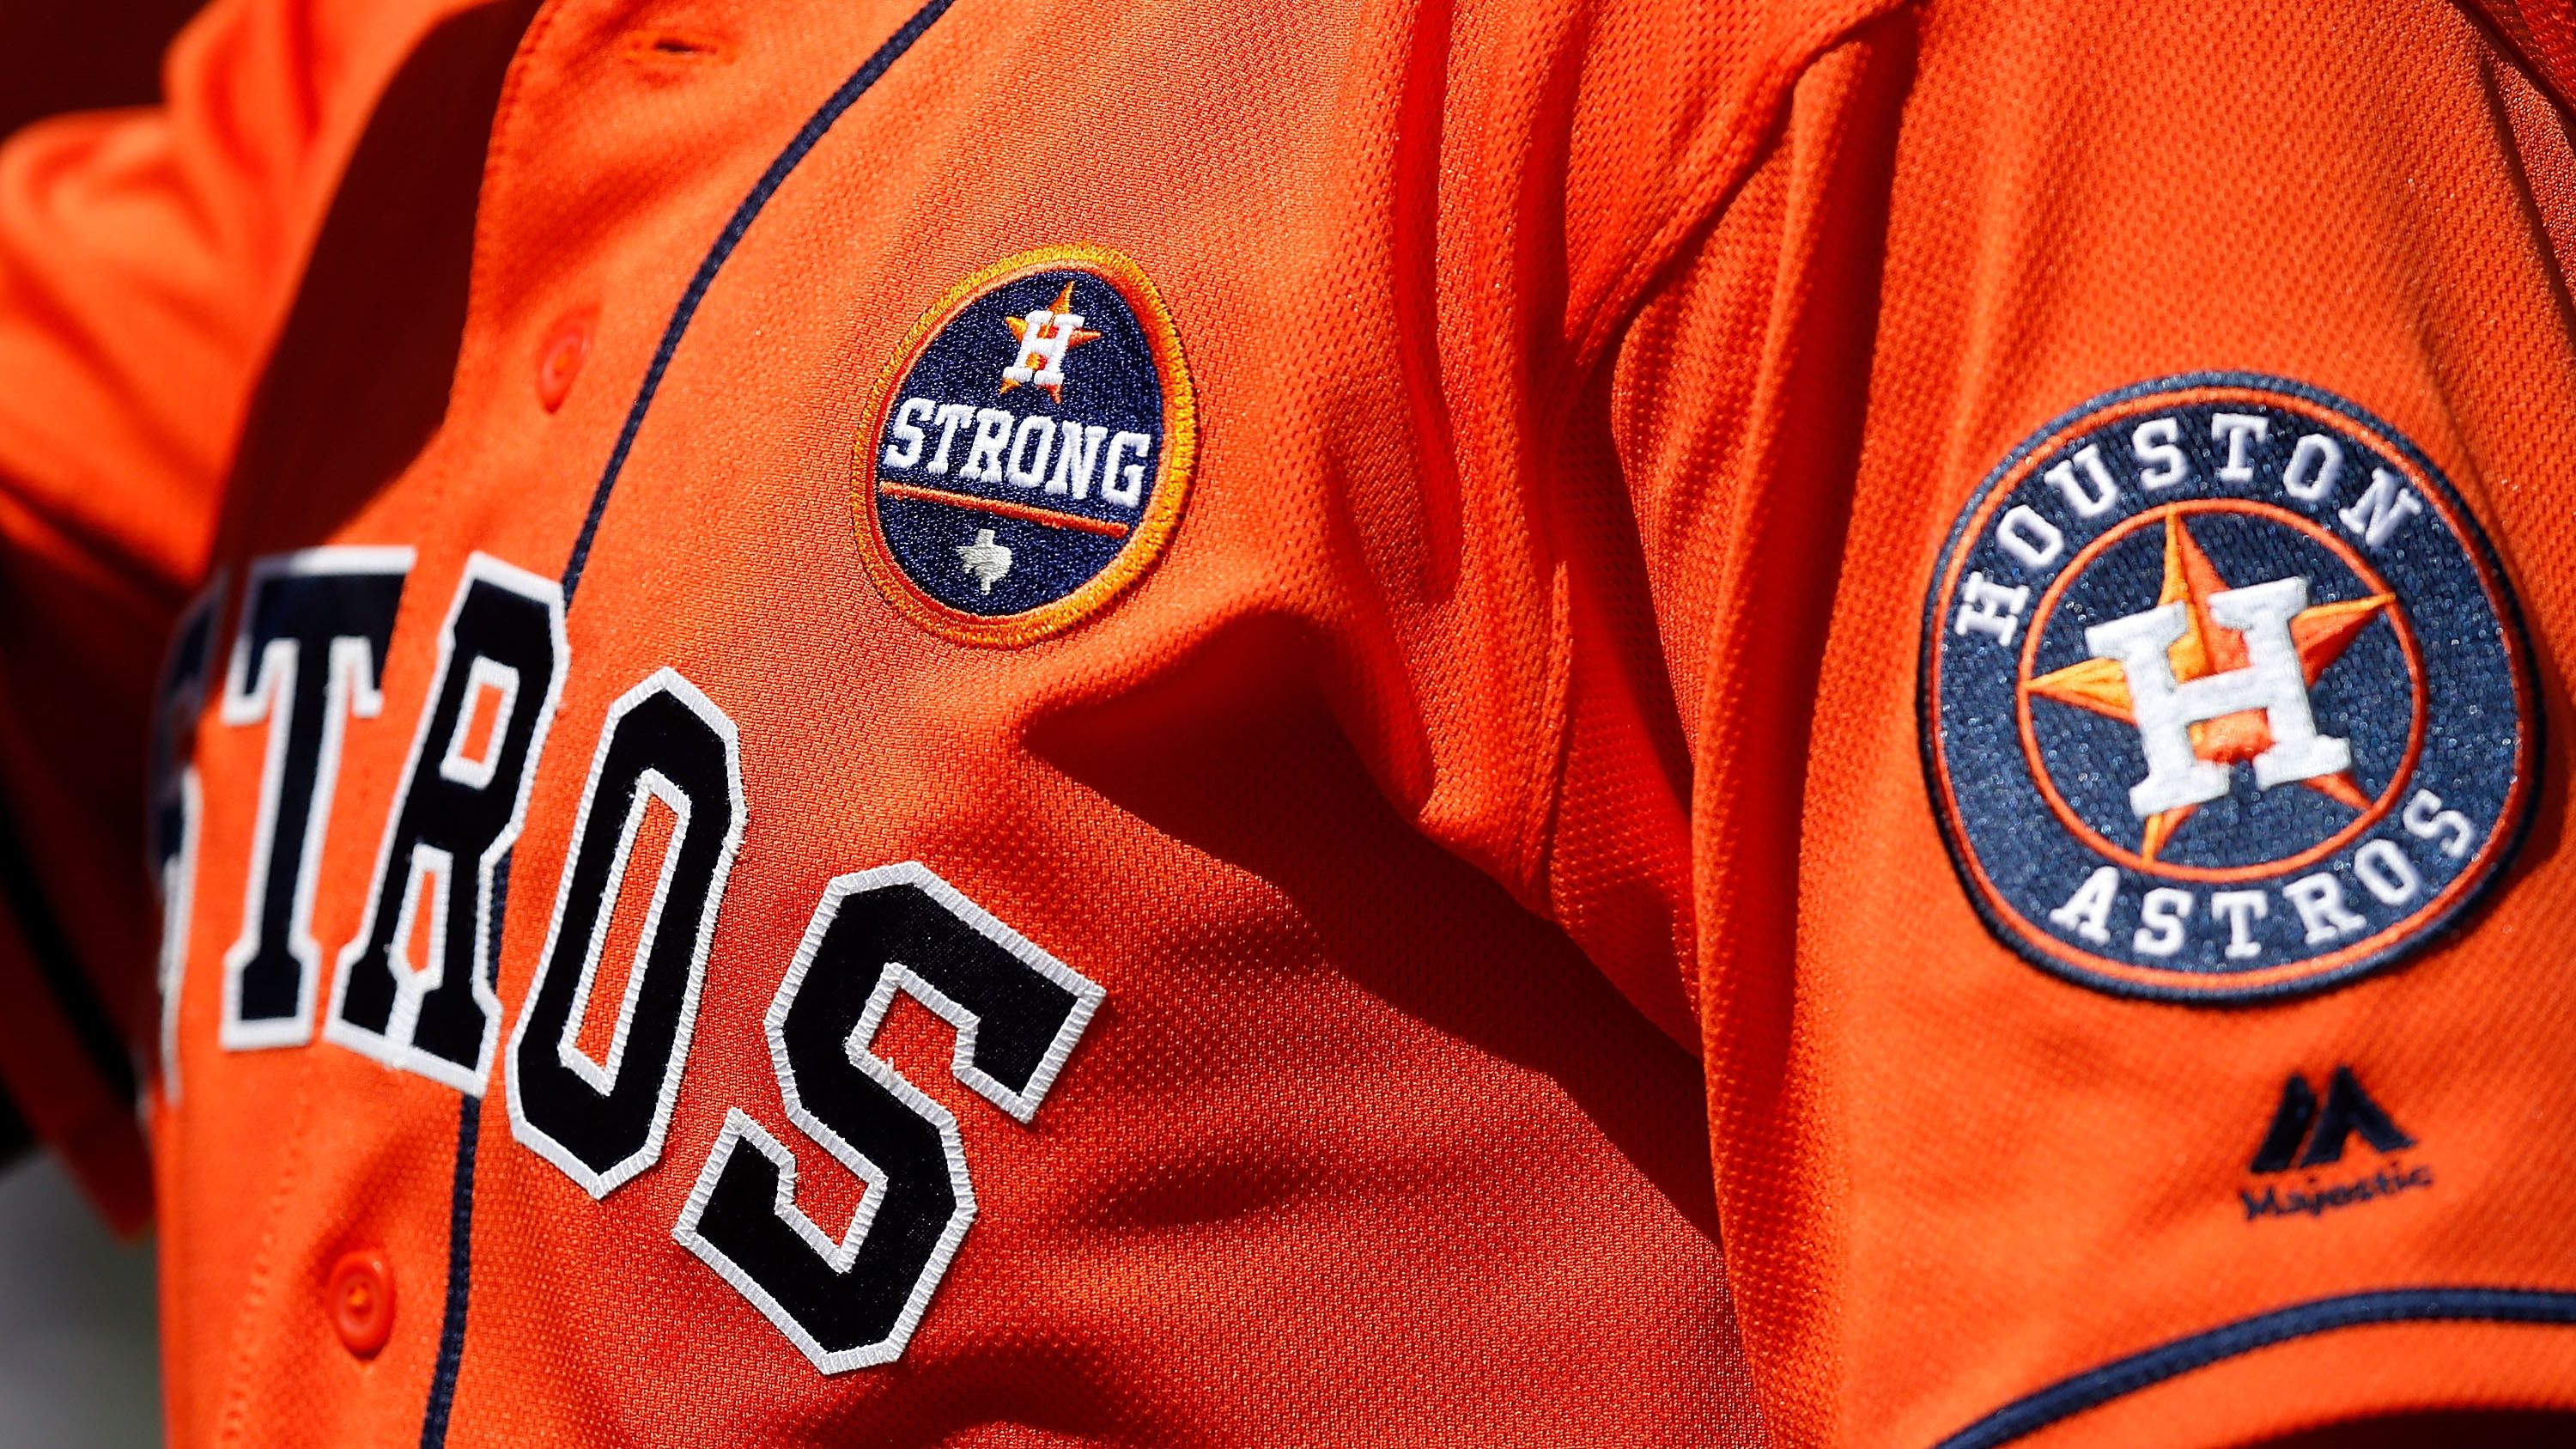 Houston Astros - Tonight's uniforms are incredible.